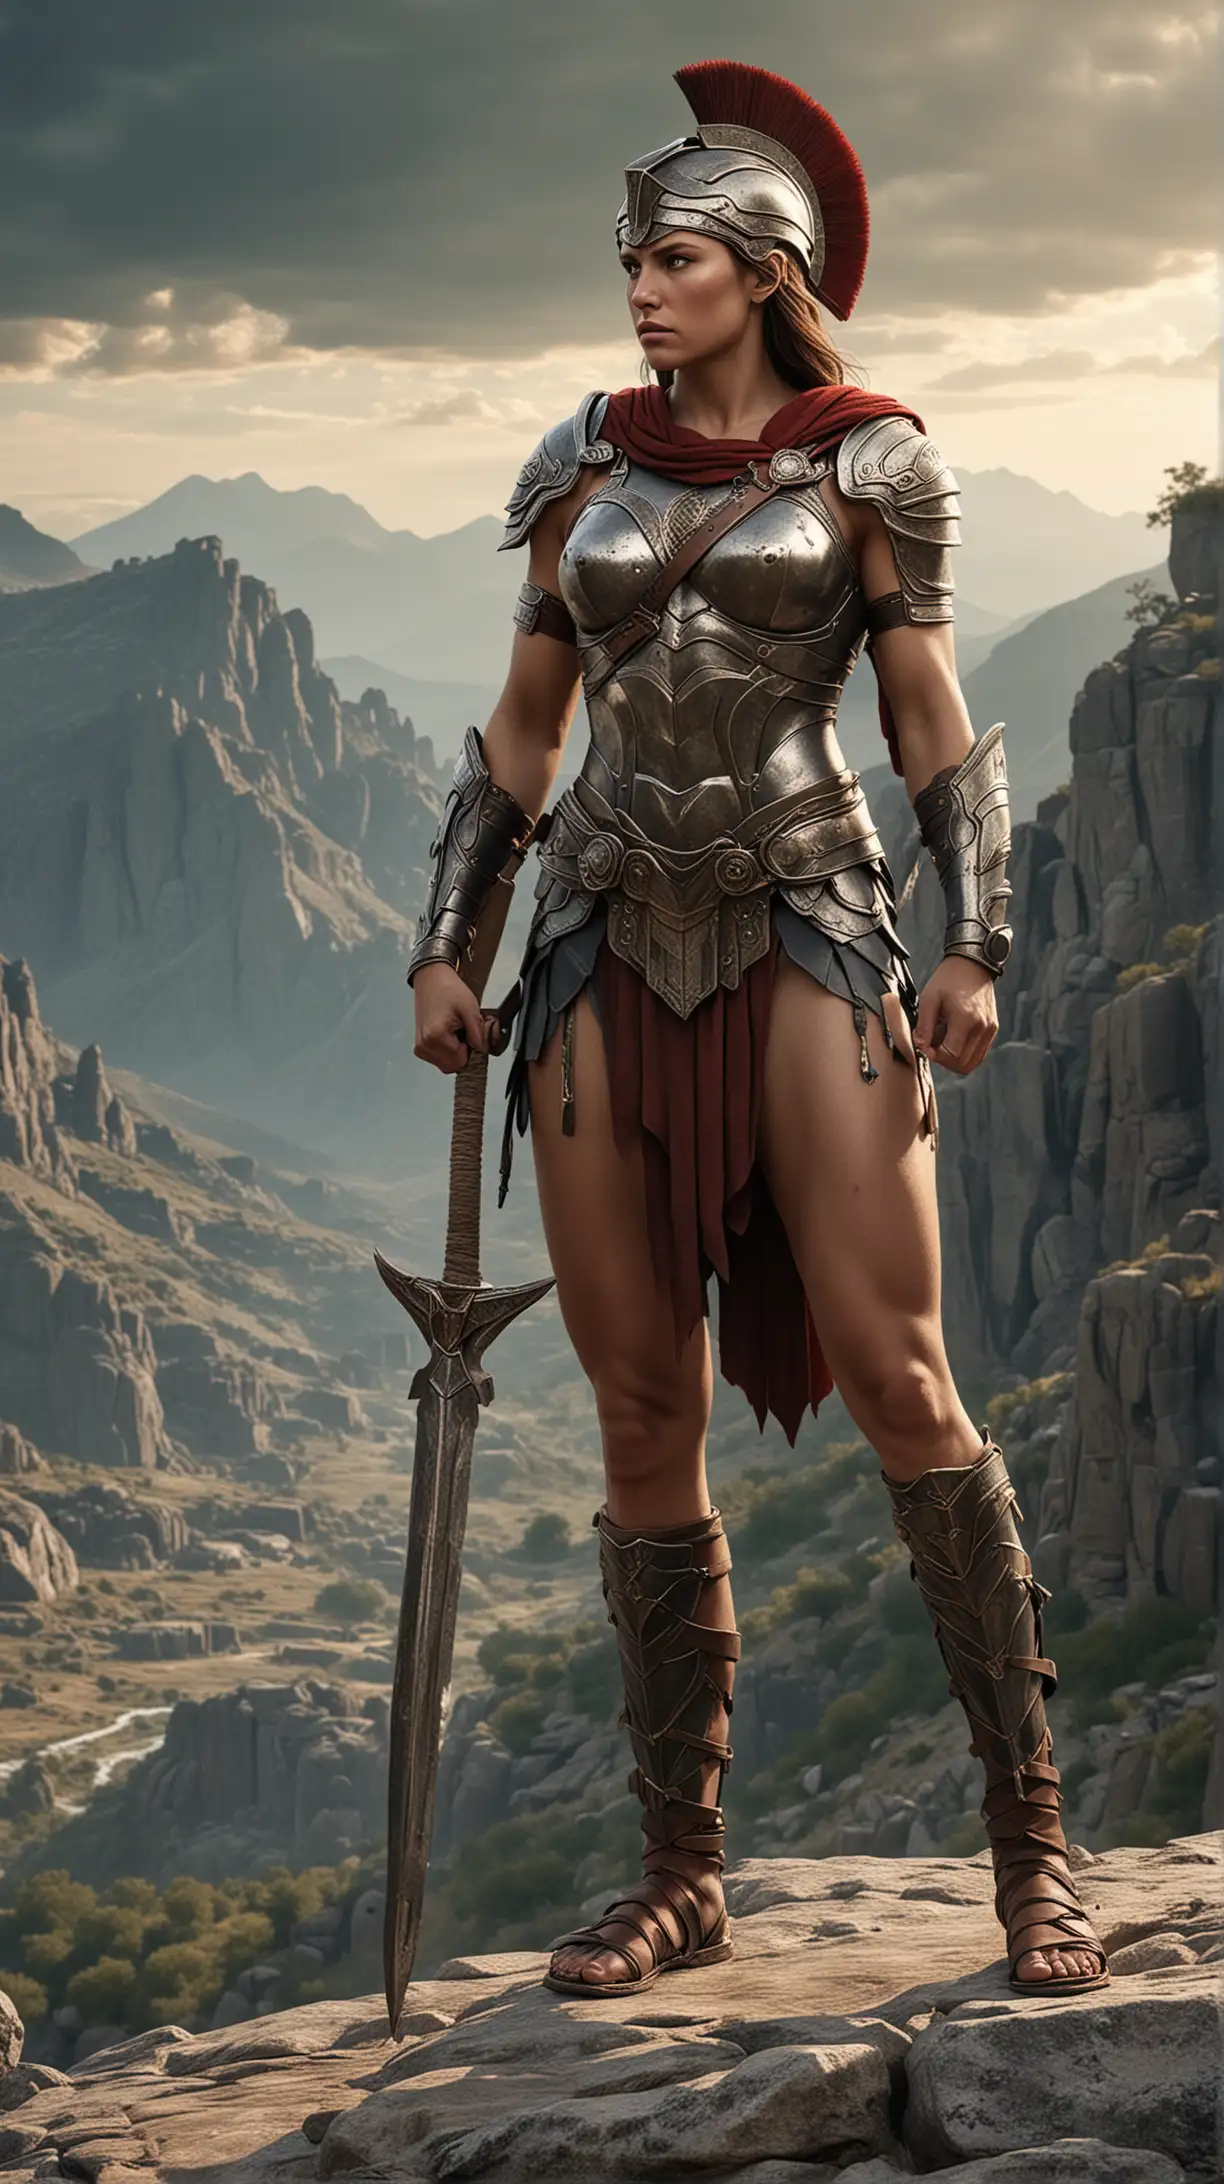 Generate an image depicting a Spartan woman, fierce and determined, adorned in traditional Spartan armor, standing atop a rocky outcrop with the backdrop of a rugged mountain landscape. Show her holding a spear confidently, with a stoic expression reflecting her strength and resilience. hyper realistic